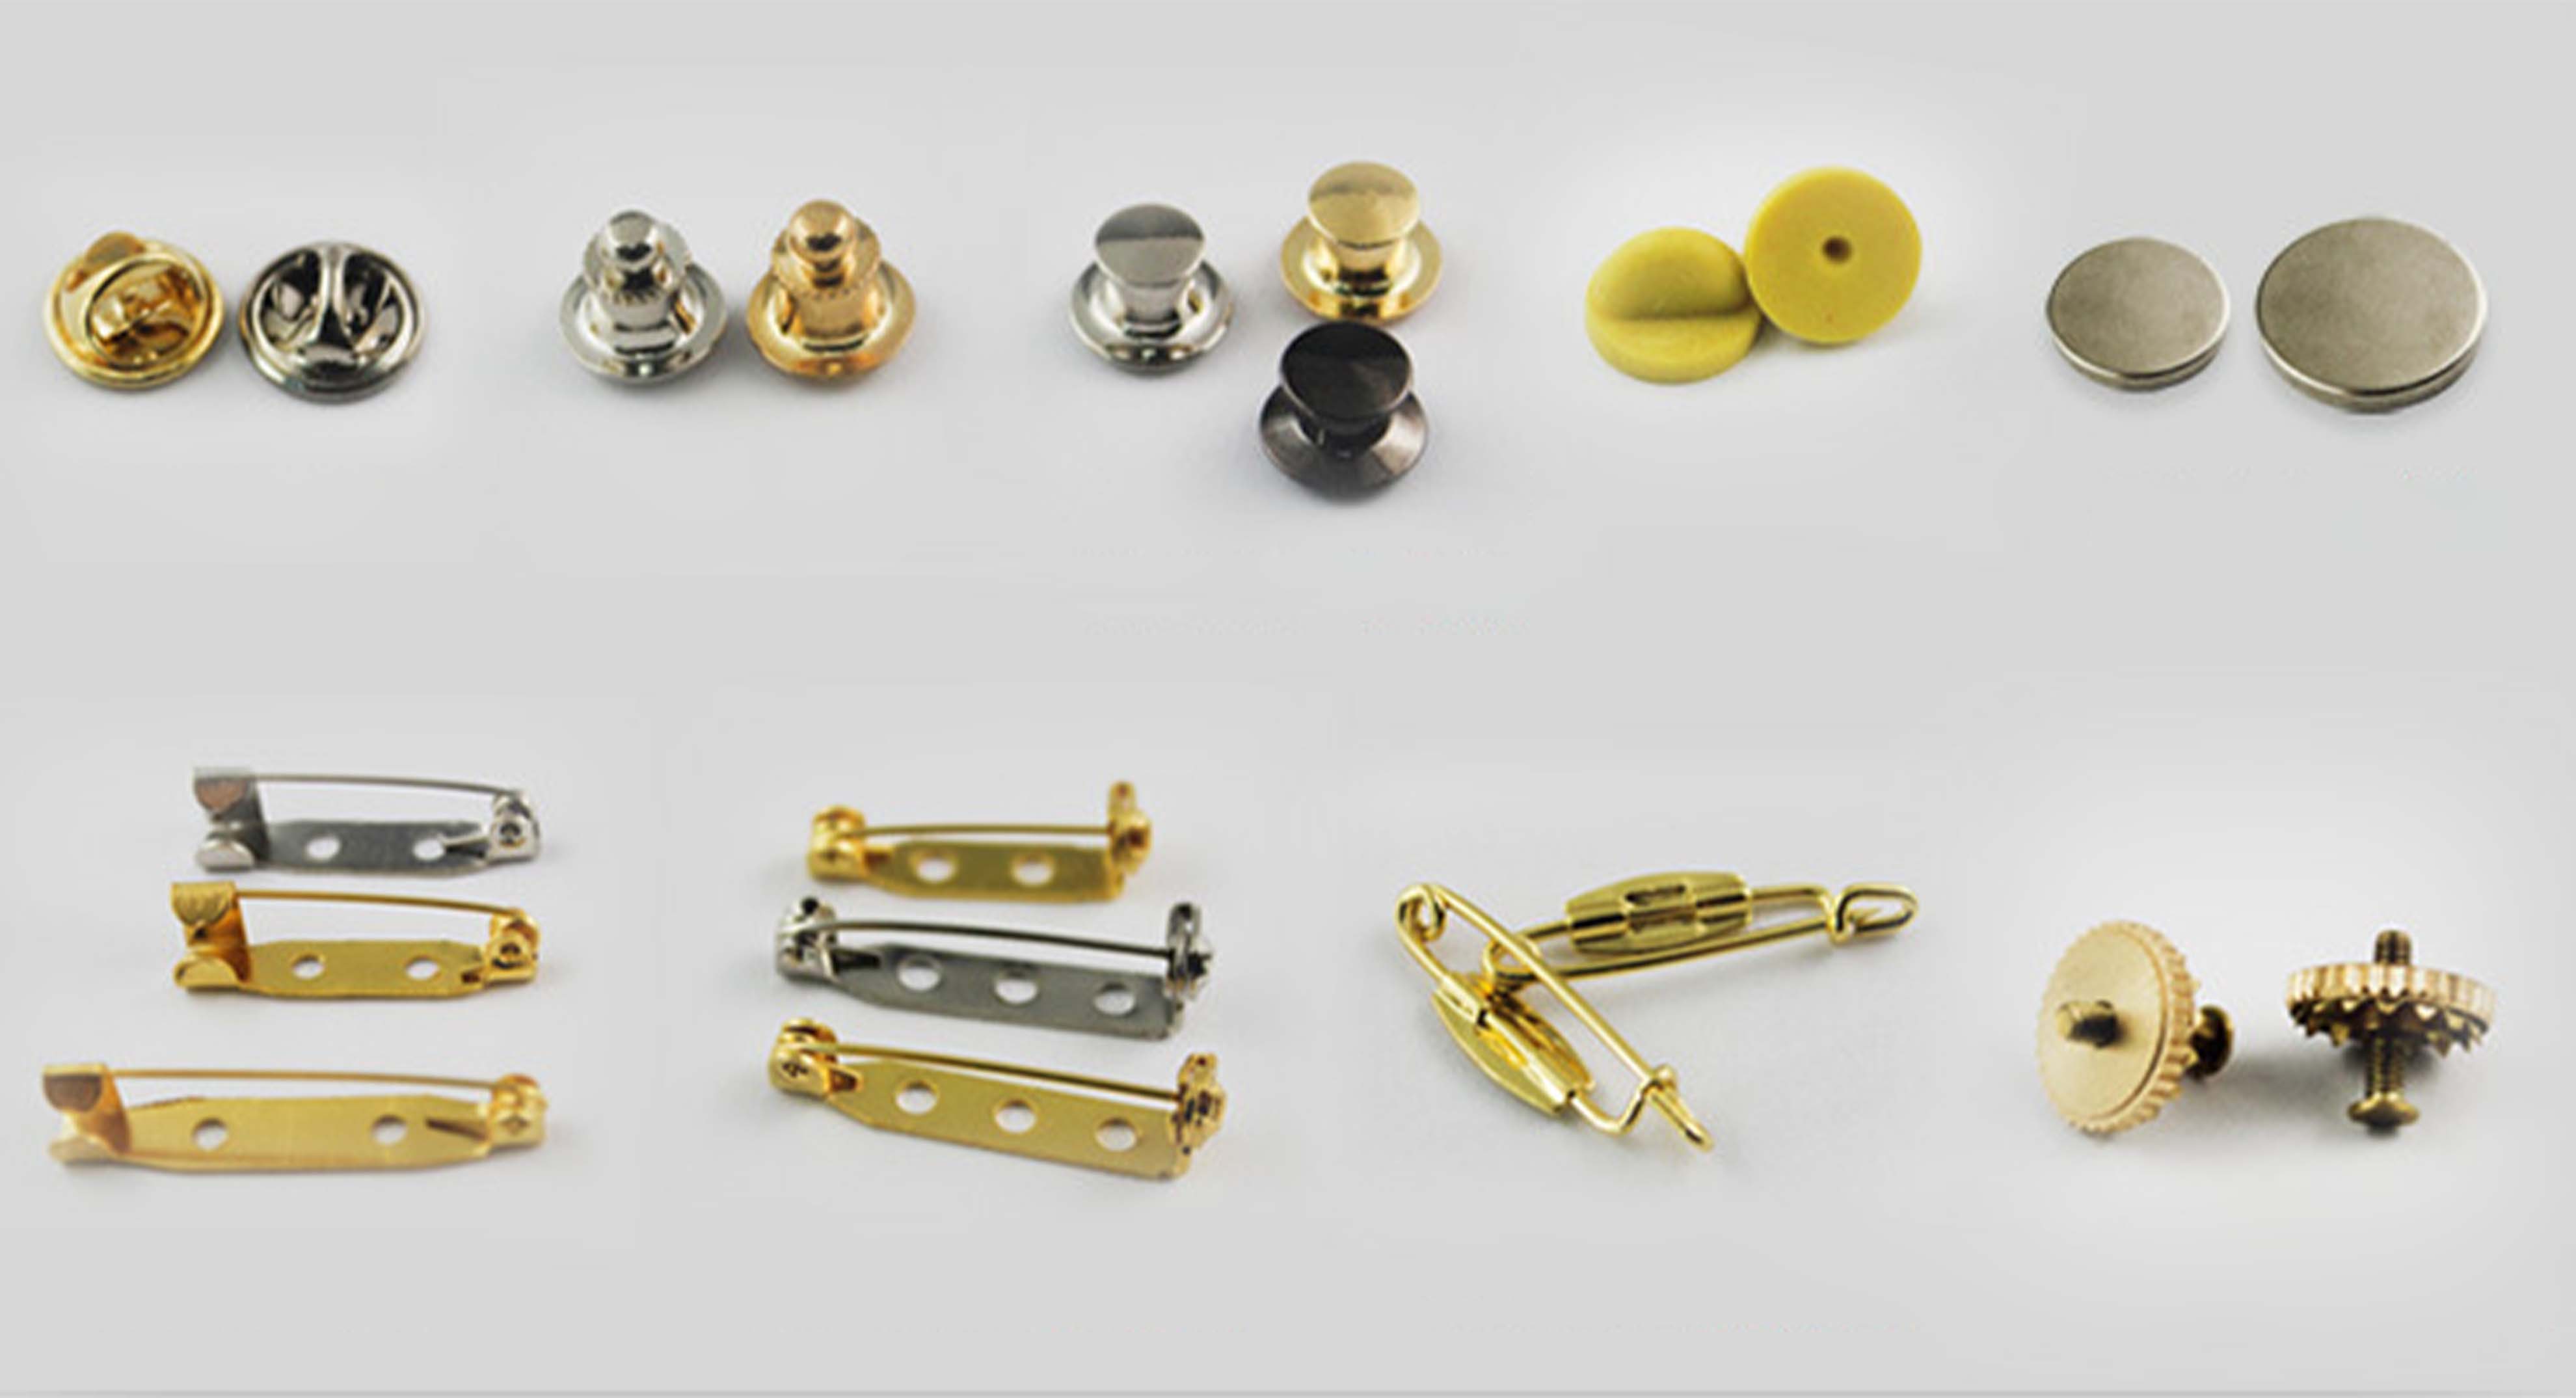 A Guide to Types of Pin Backs and Attachments: Enhancing Your Pin's Quality and Style